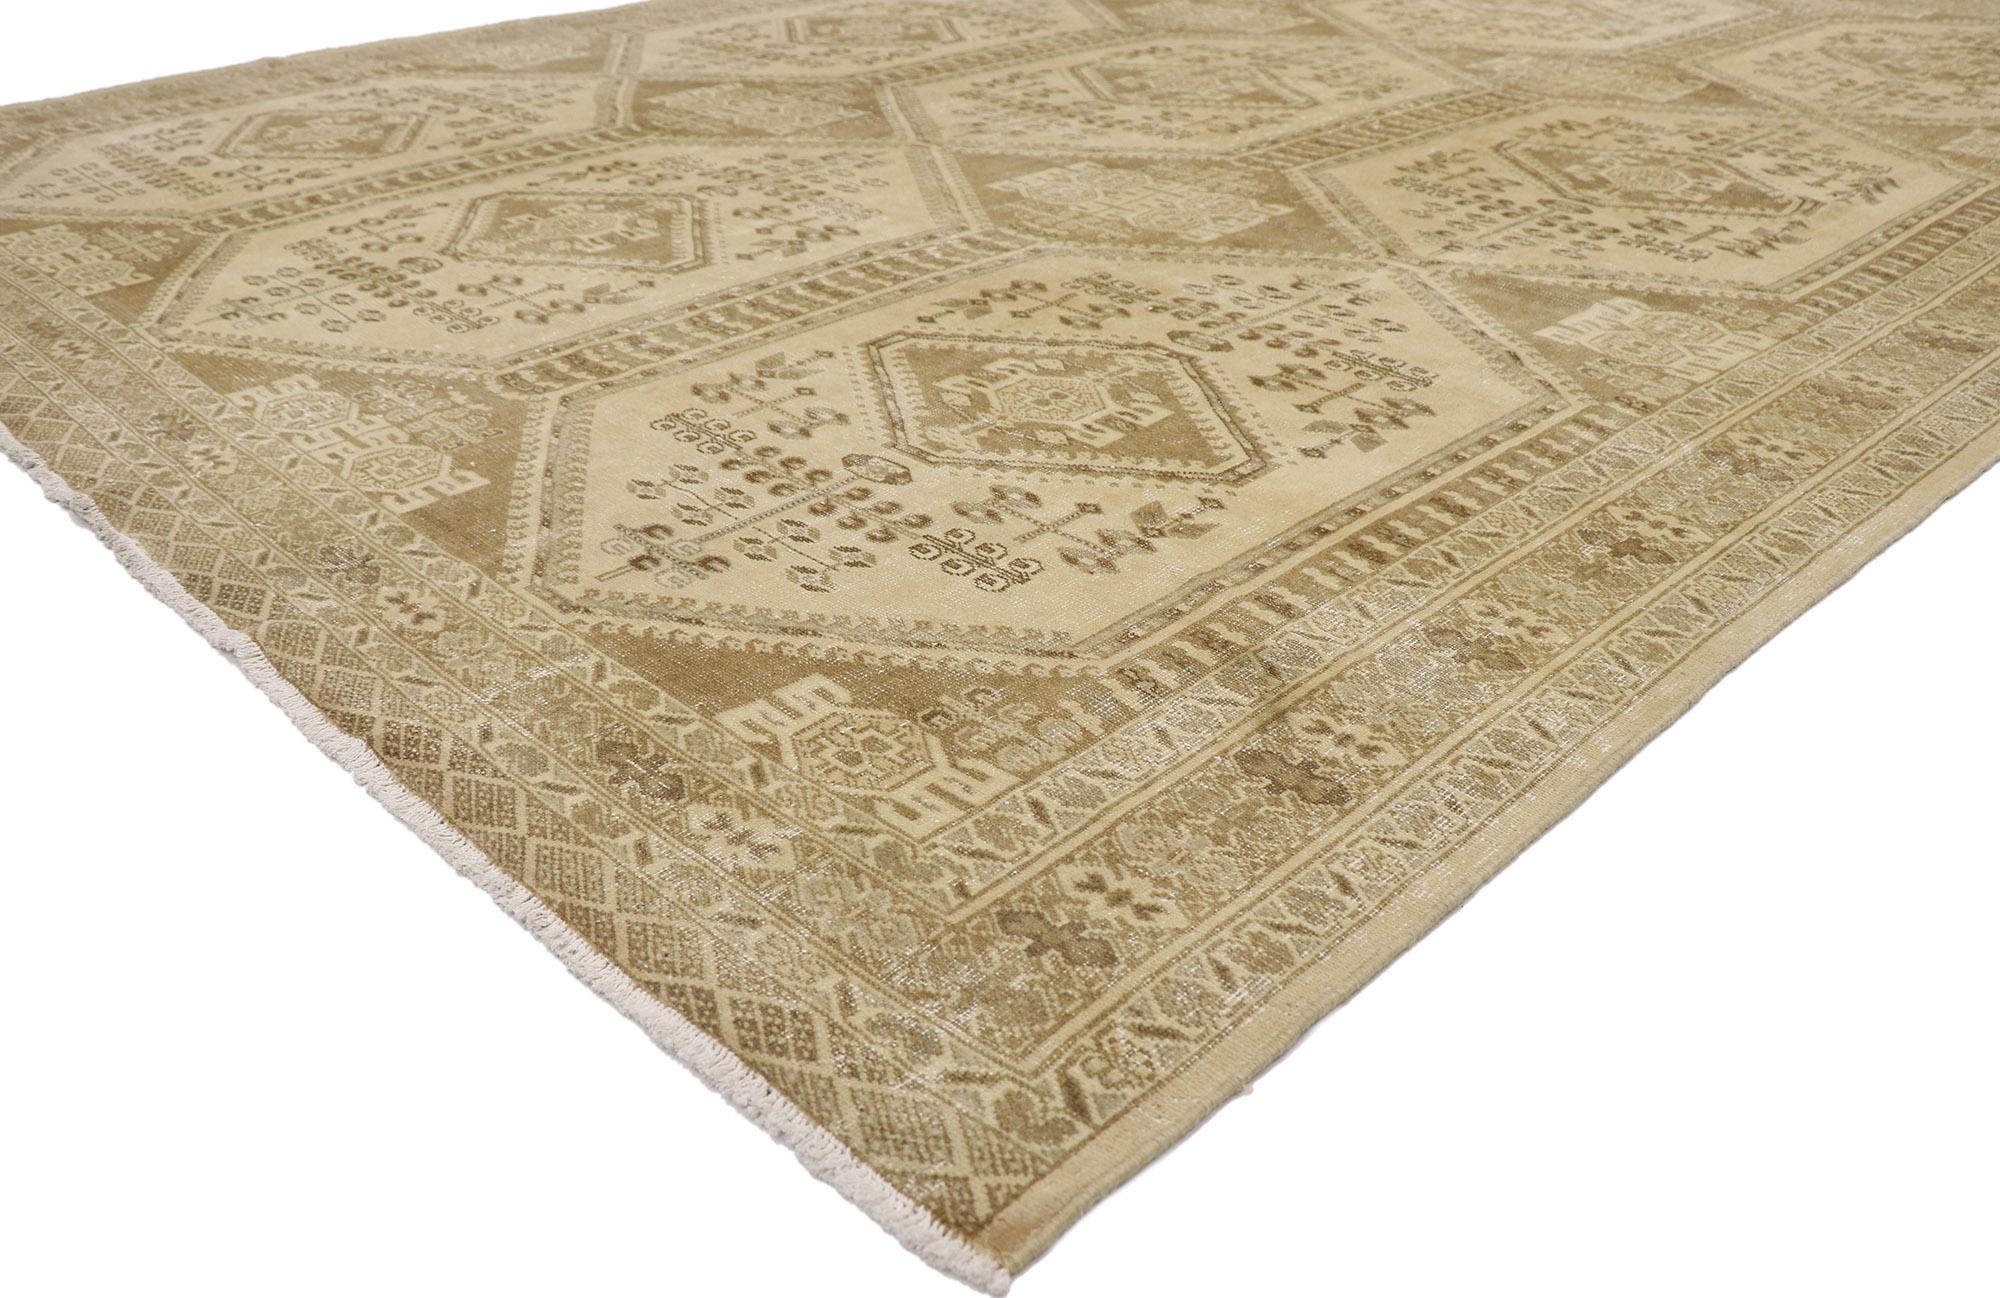 60938 Distressed Antique Persian Turkaman rug with Modern Rustic Style 09'09 x 12'04. Emanating sophistication and nomadic charm with rustic sensibility, this hand knotted wool distressed antique Persian Turkaman rug beautifully embodies a modern